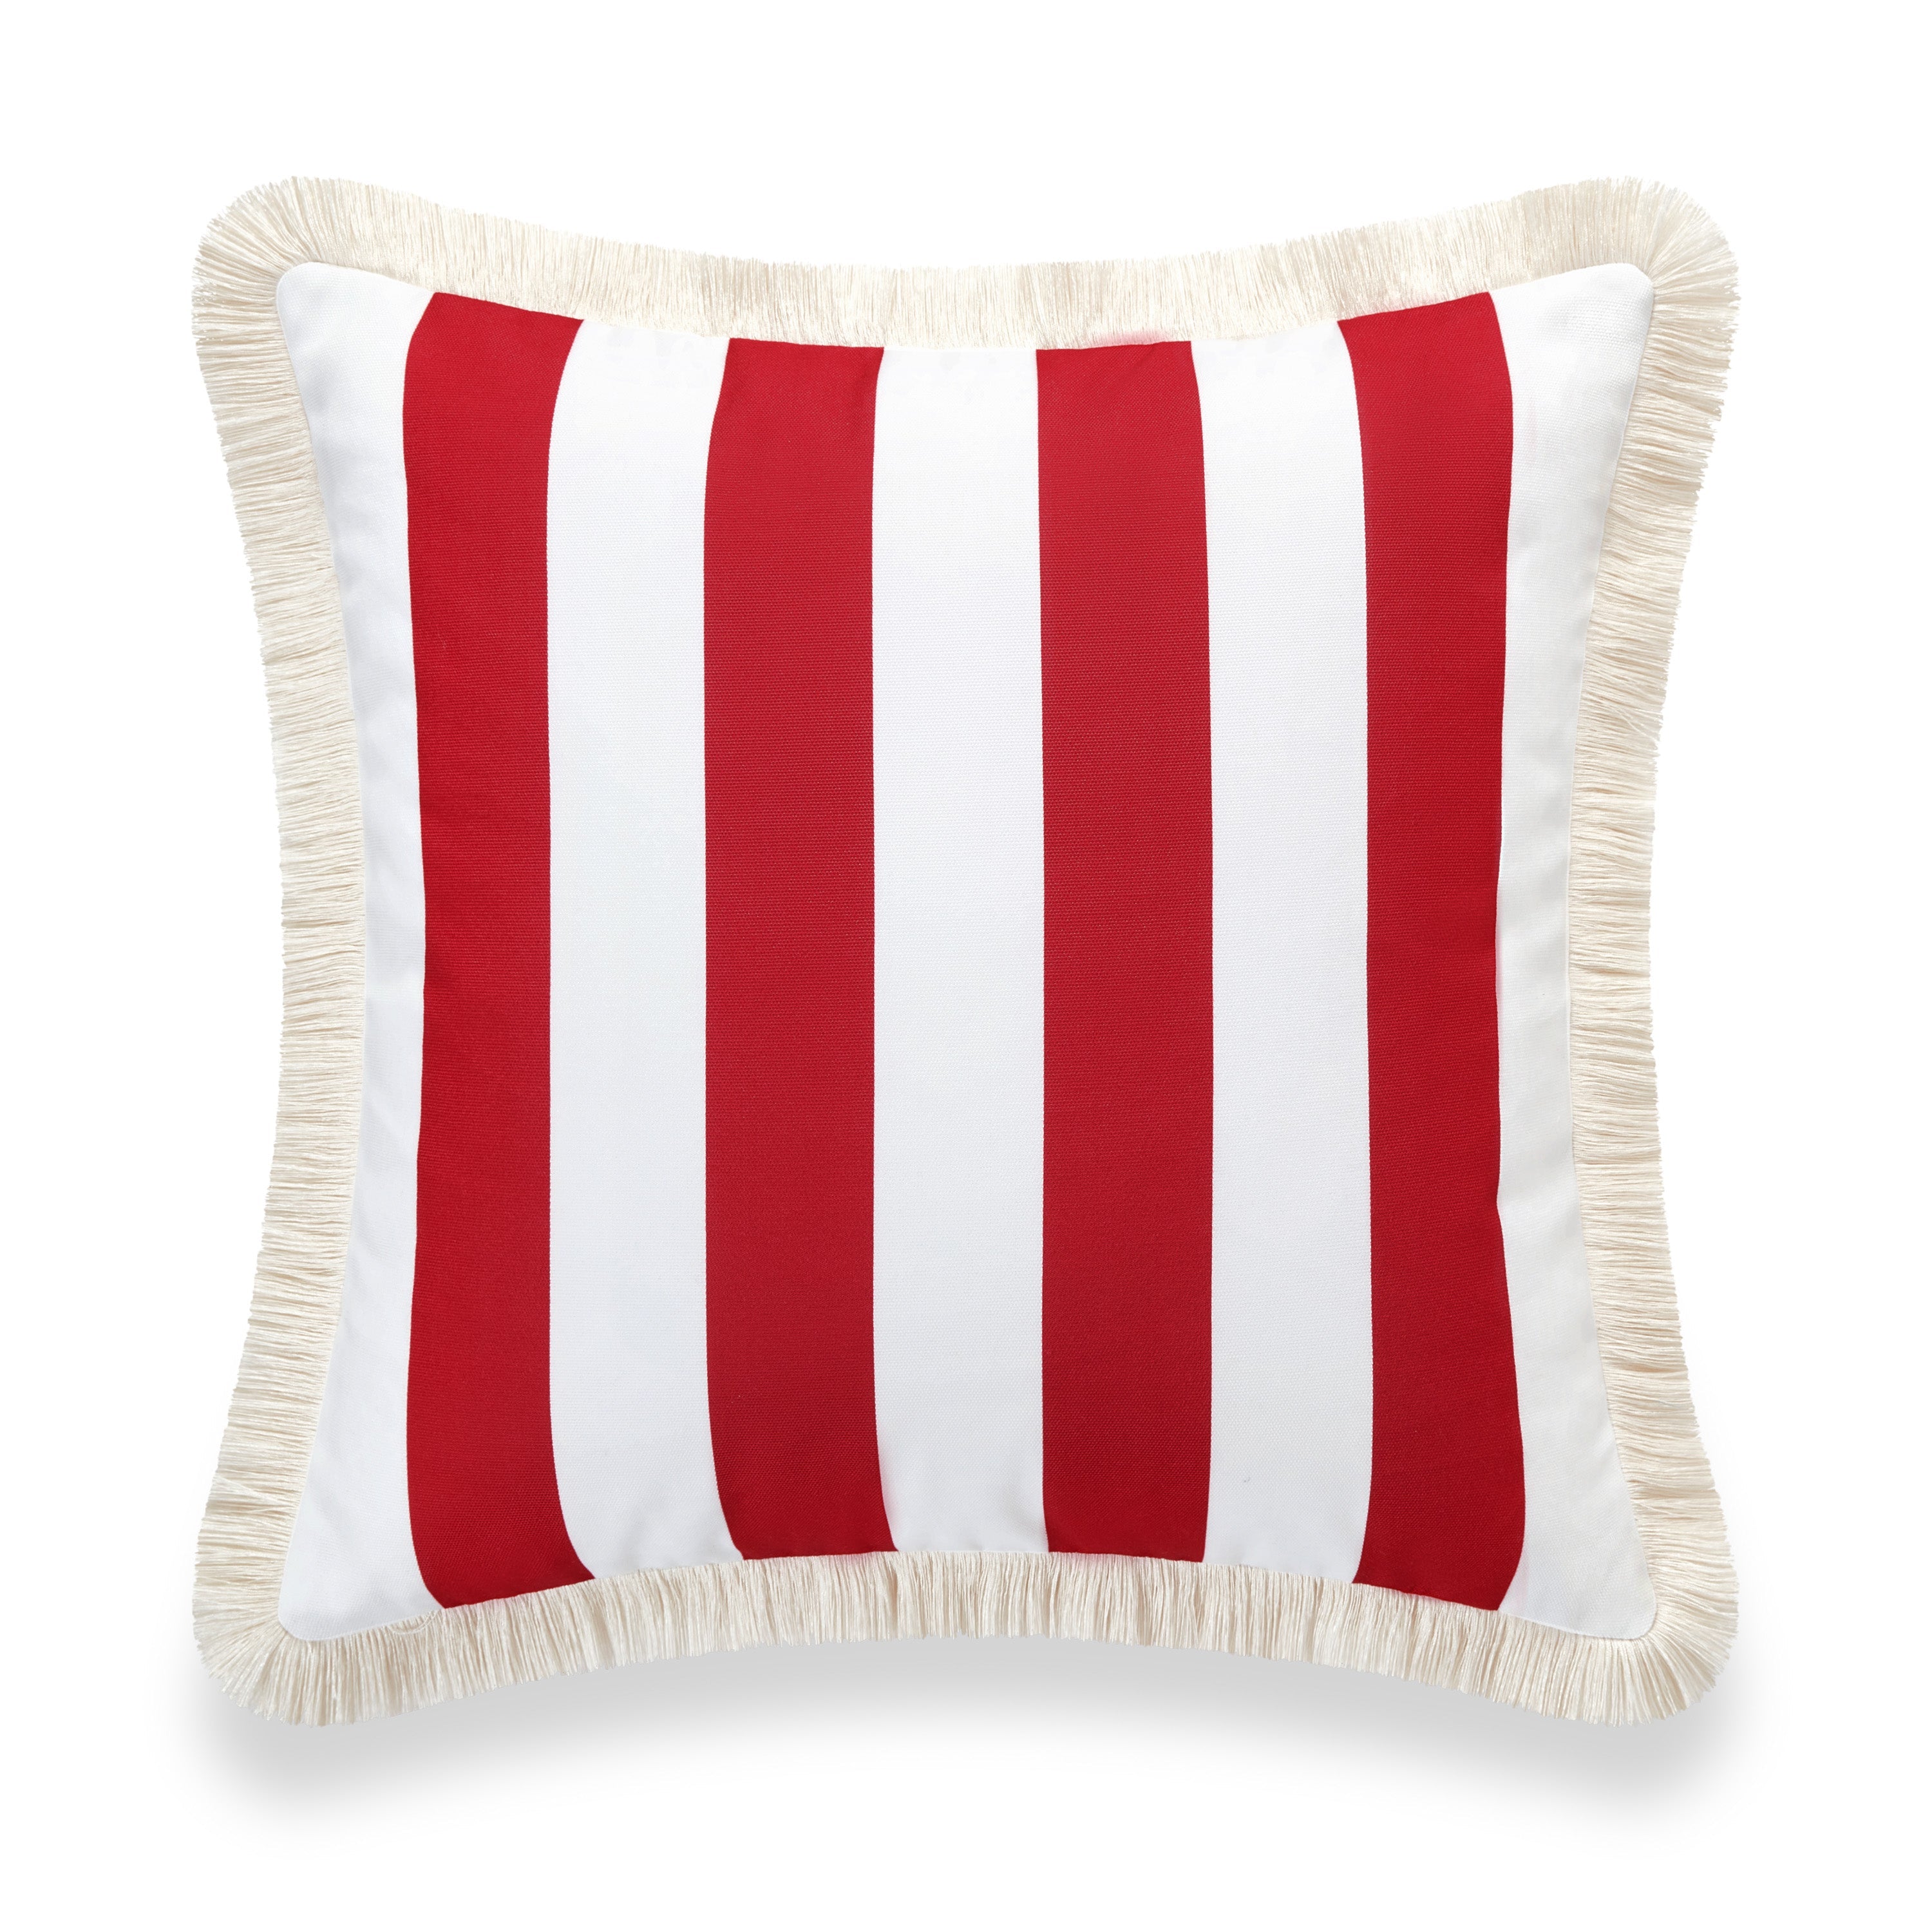 Coastal Indoor Outdoor Pillow Cover, Stripe Fringe, Red, 20"x20"